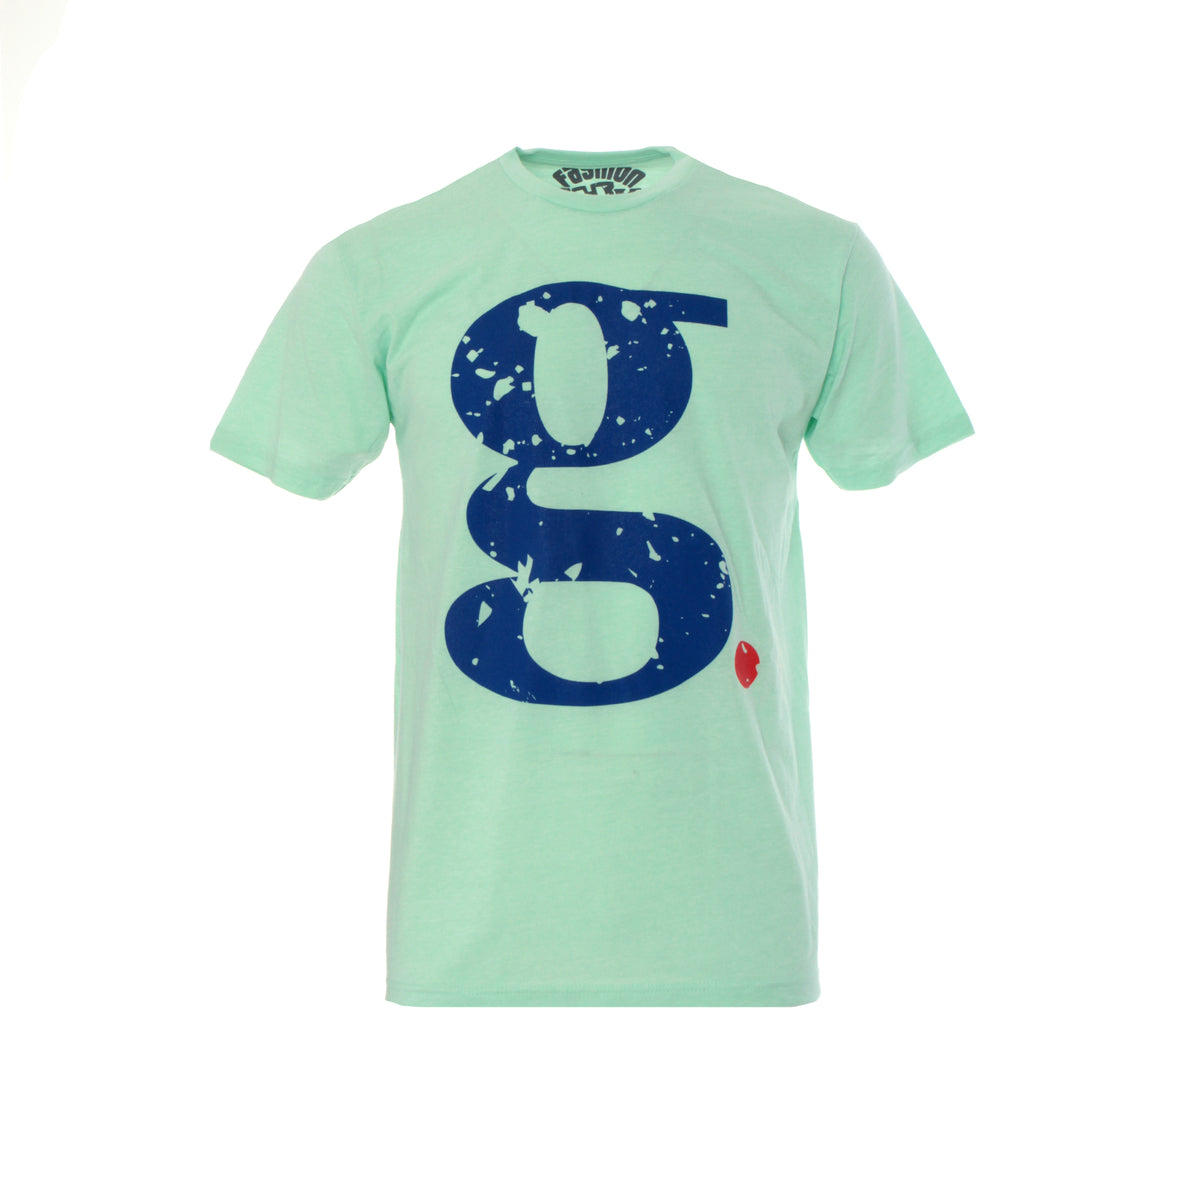 Fashion Geek Red Dot SS Graphic Men's SS Tee Mint